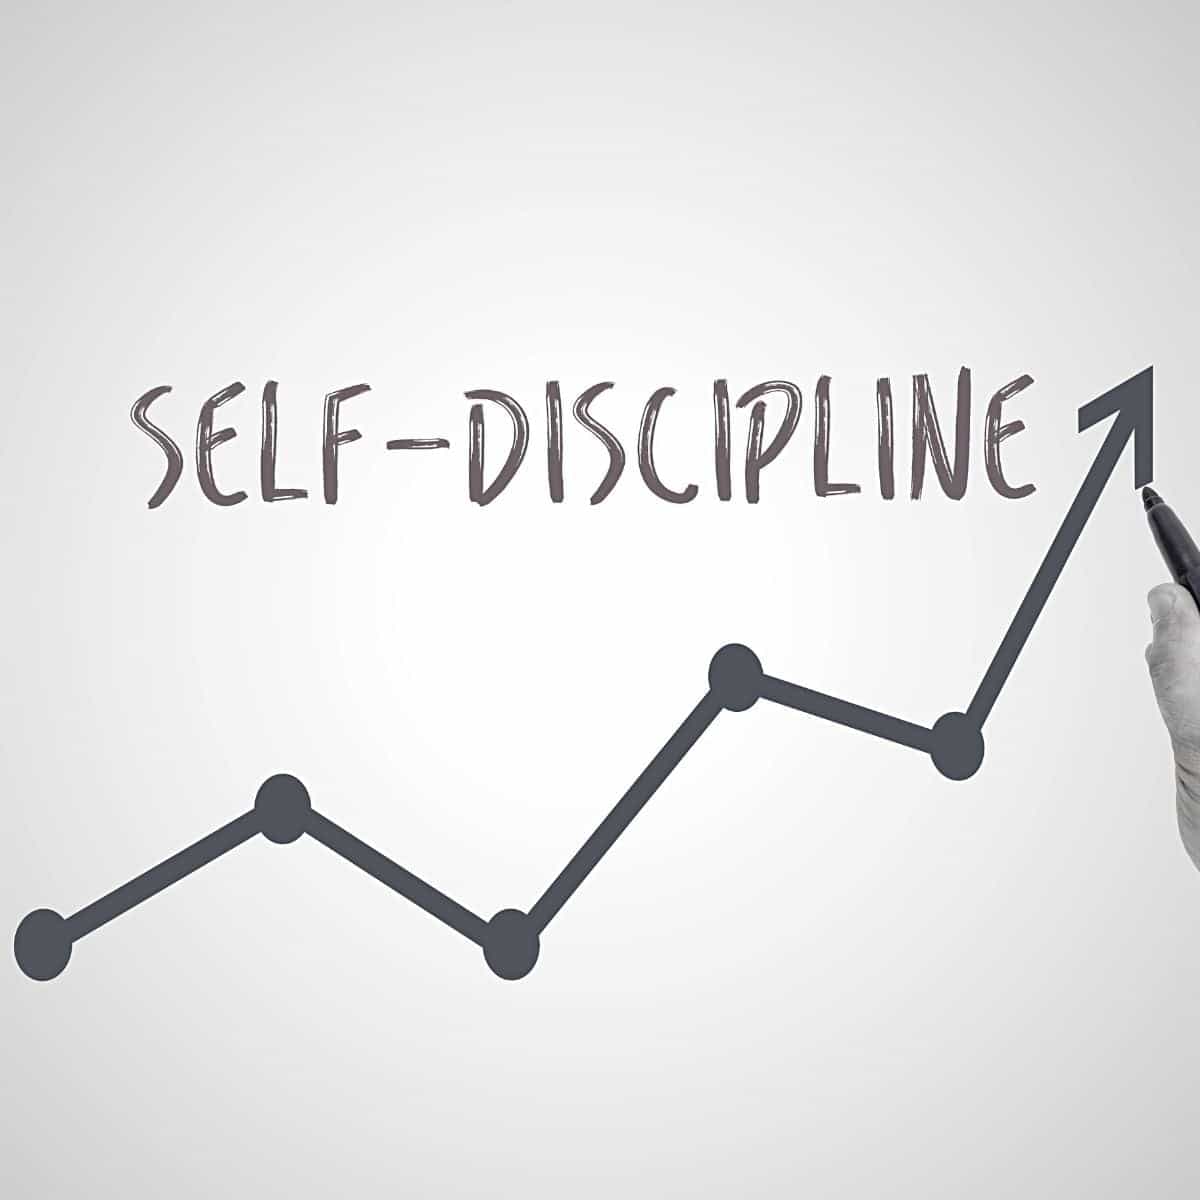 Self-discipline written out with a chart underneath.